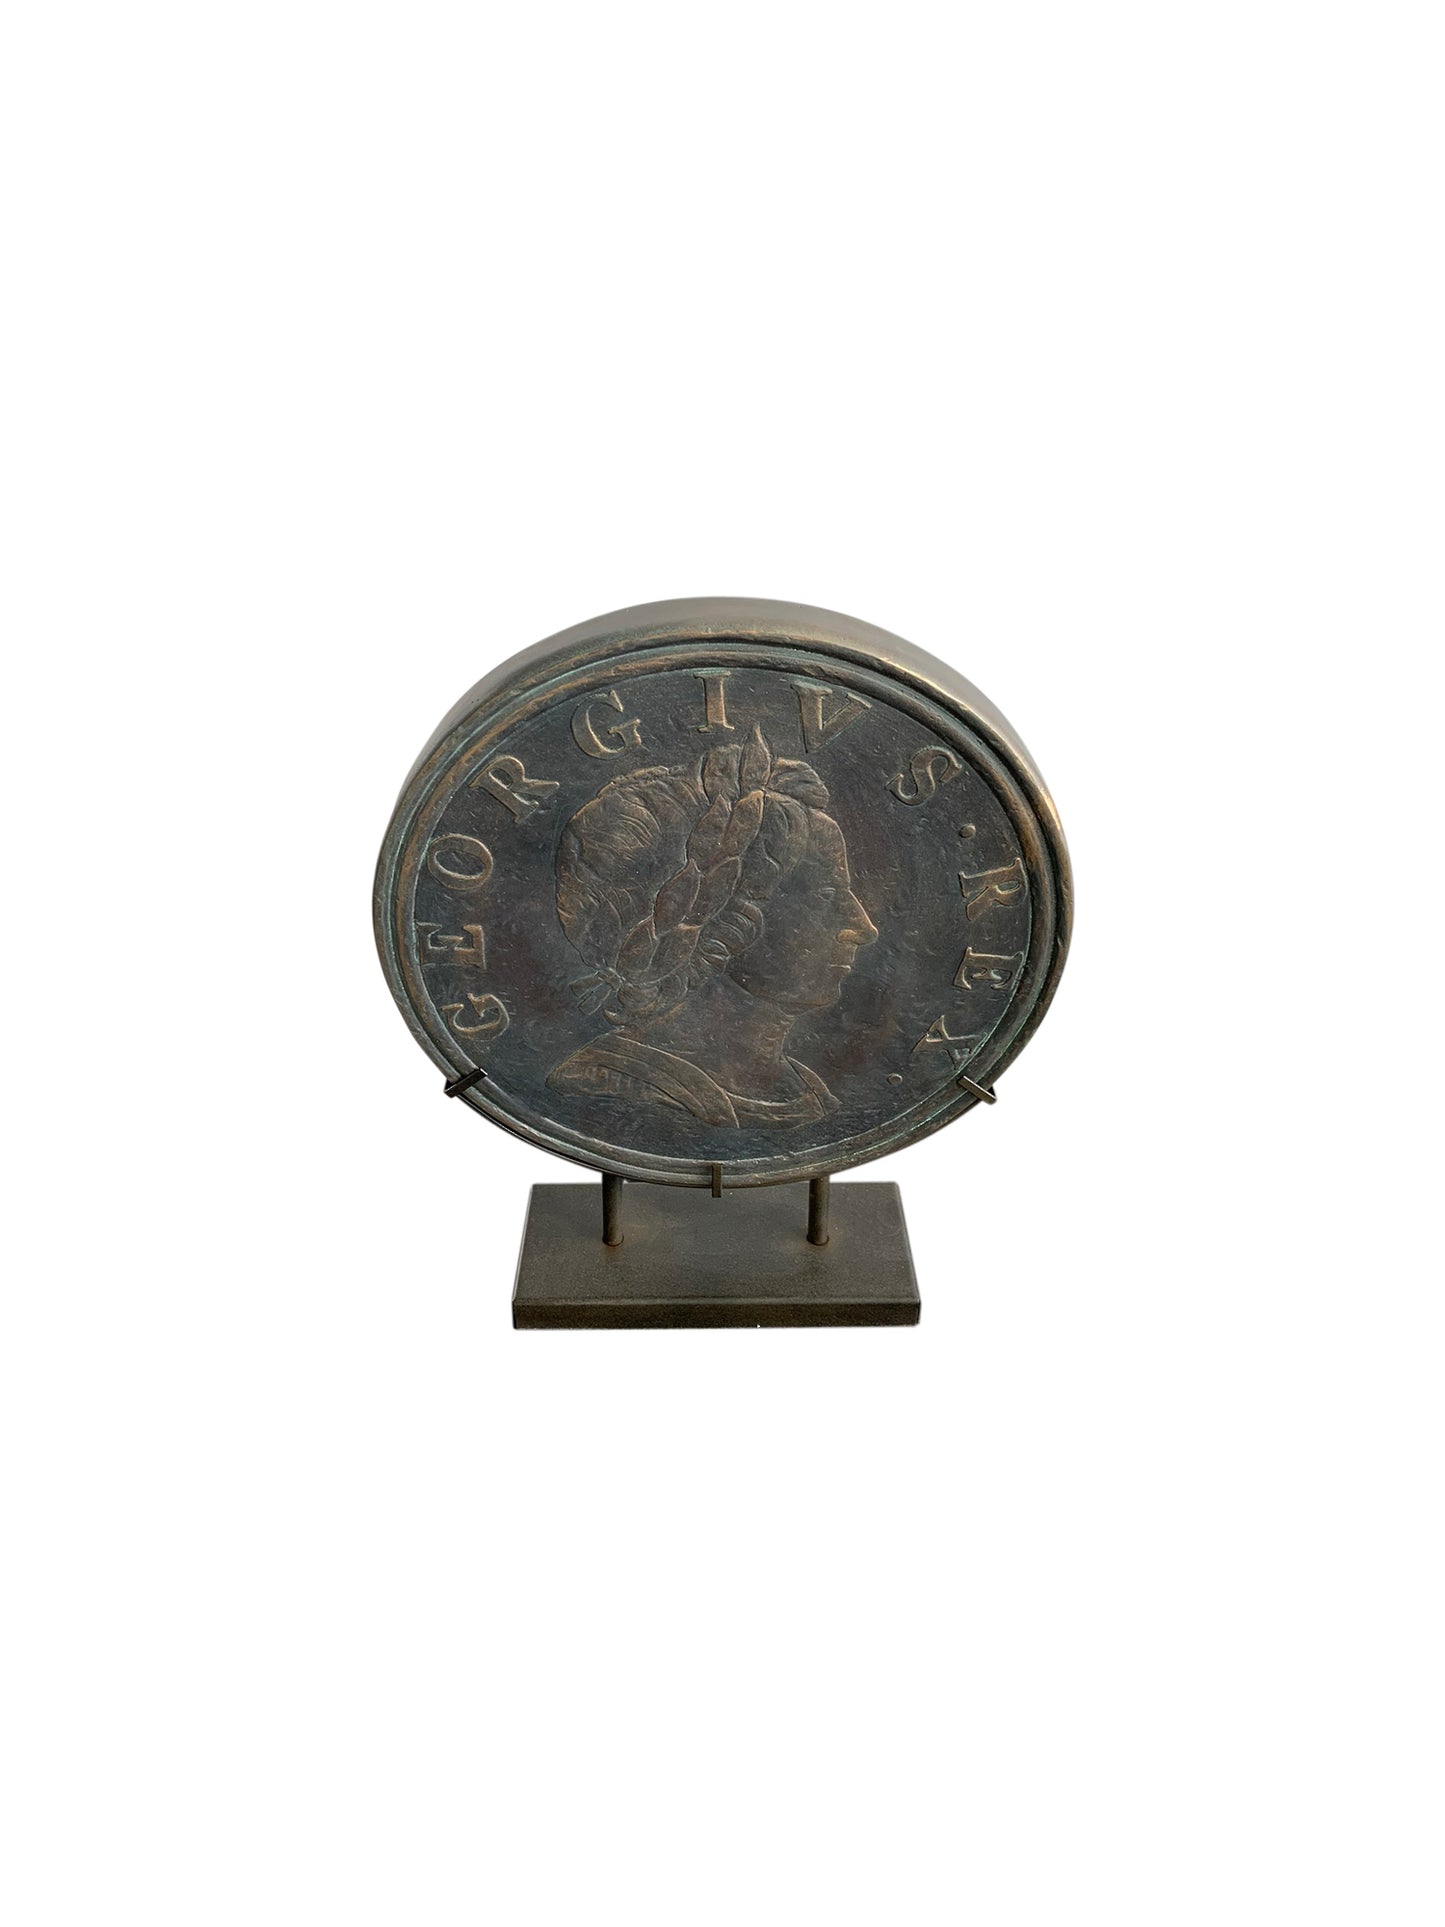 Antique Old Coin on Stand